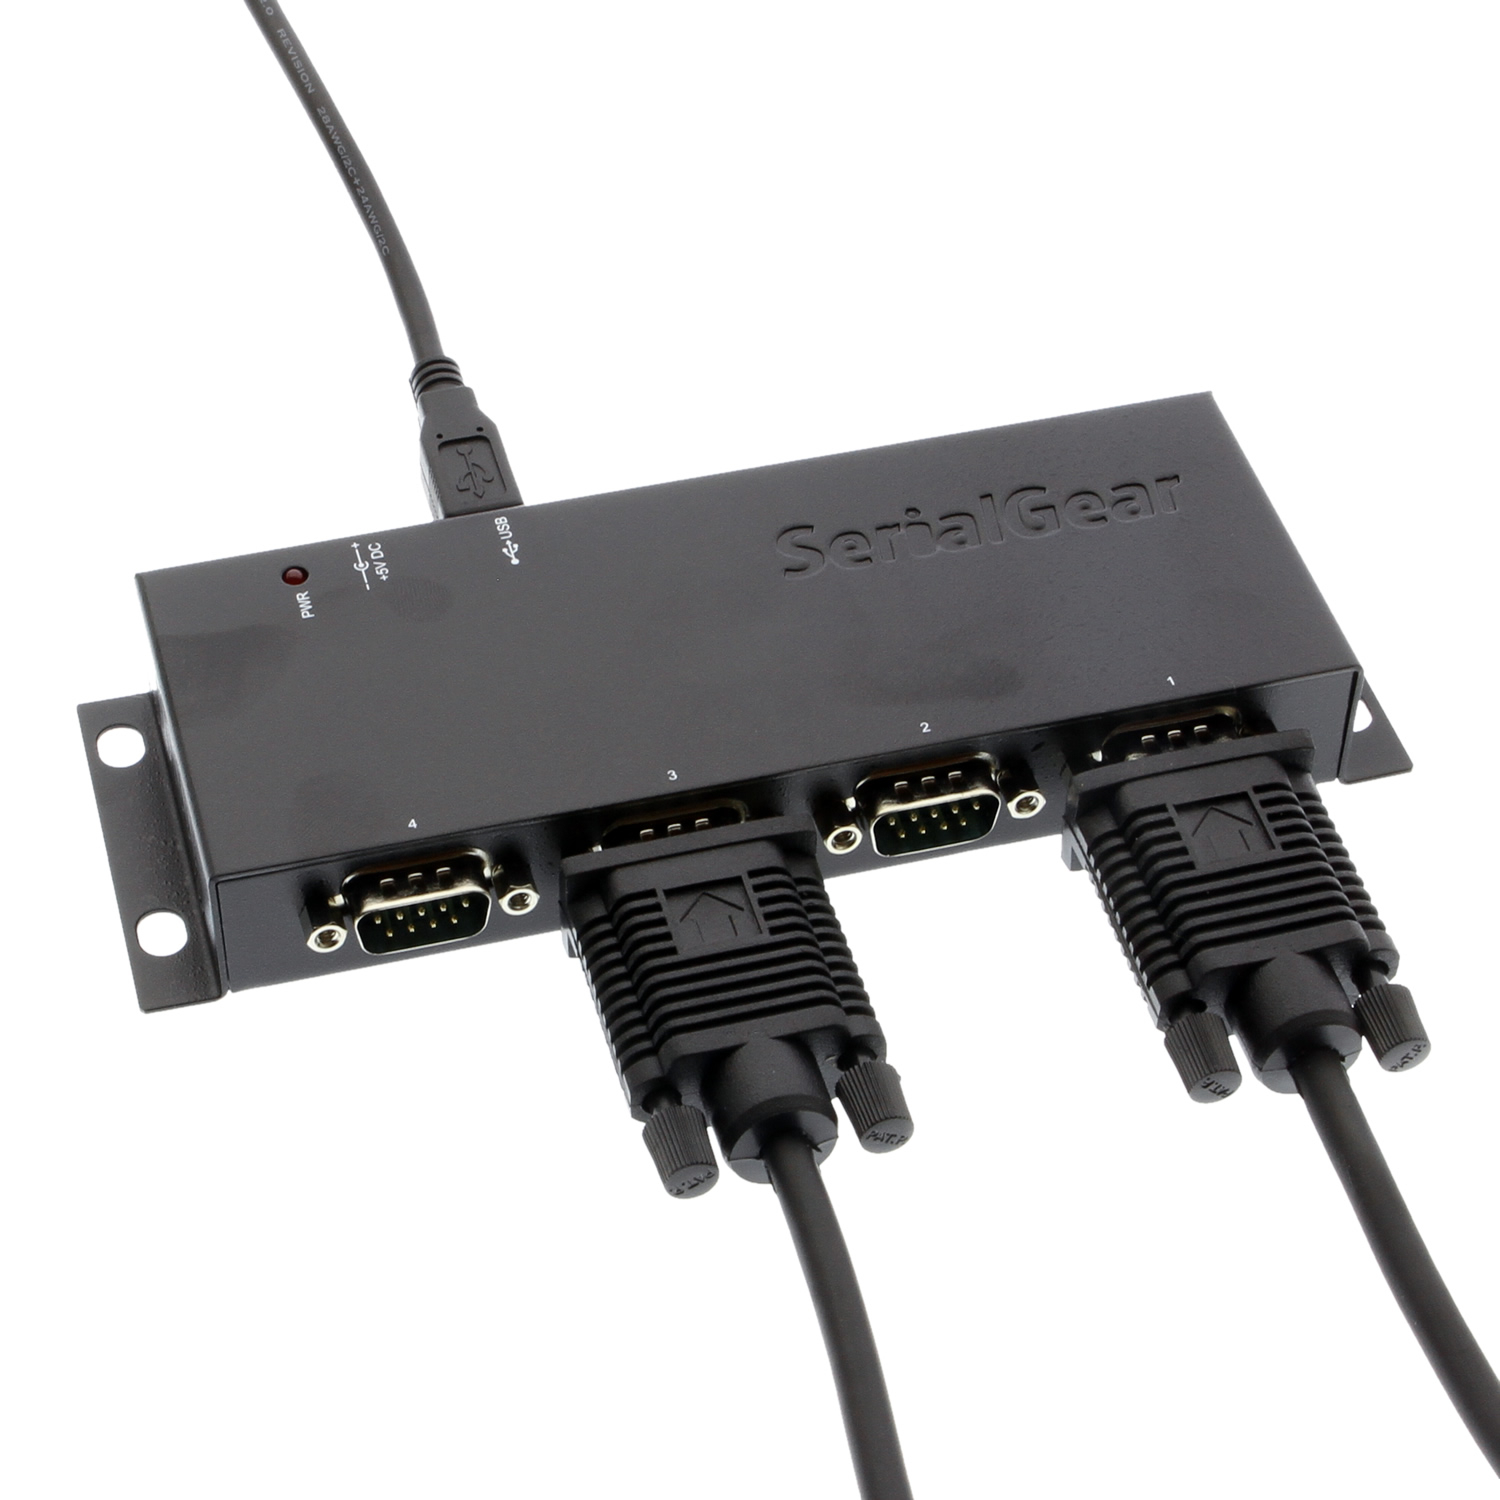 SerialGear USB to serial 4 Port DB-9 RS-232 Adapter with FTDI Chip